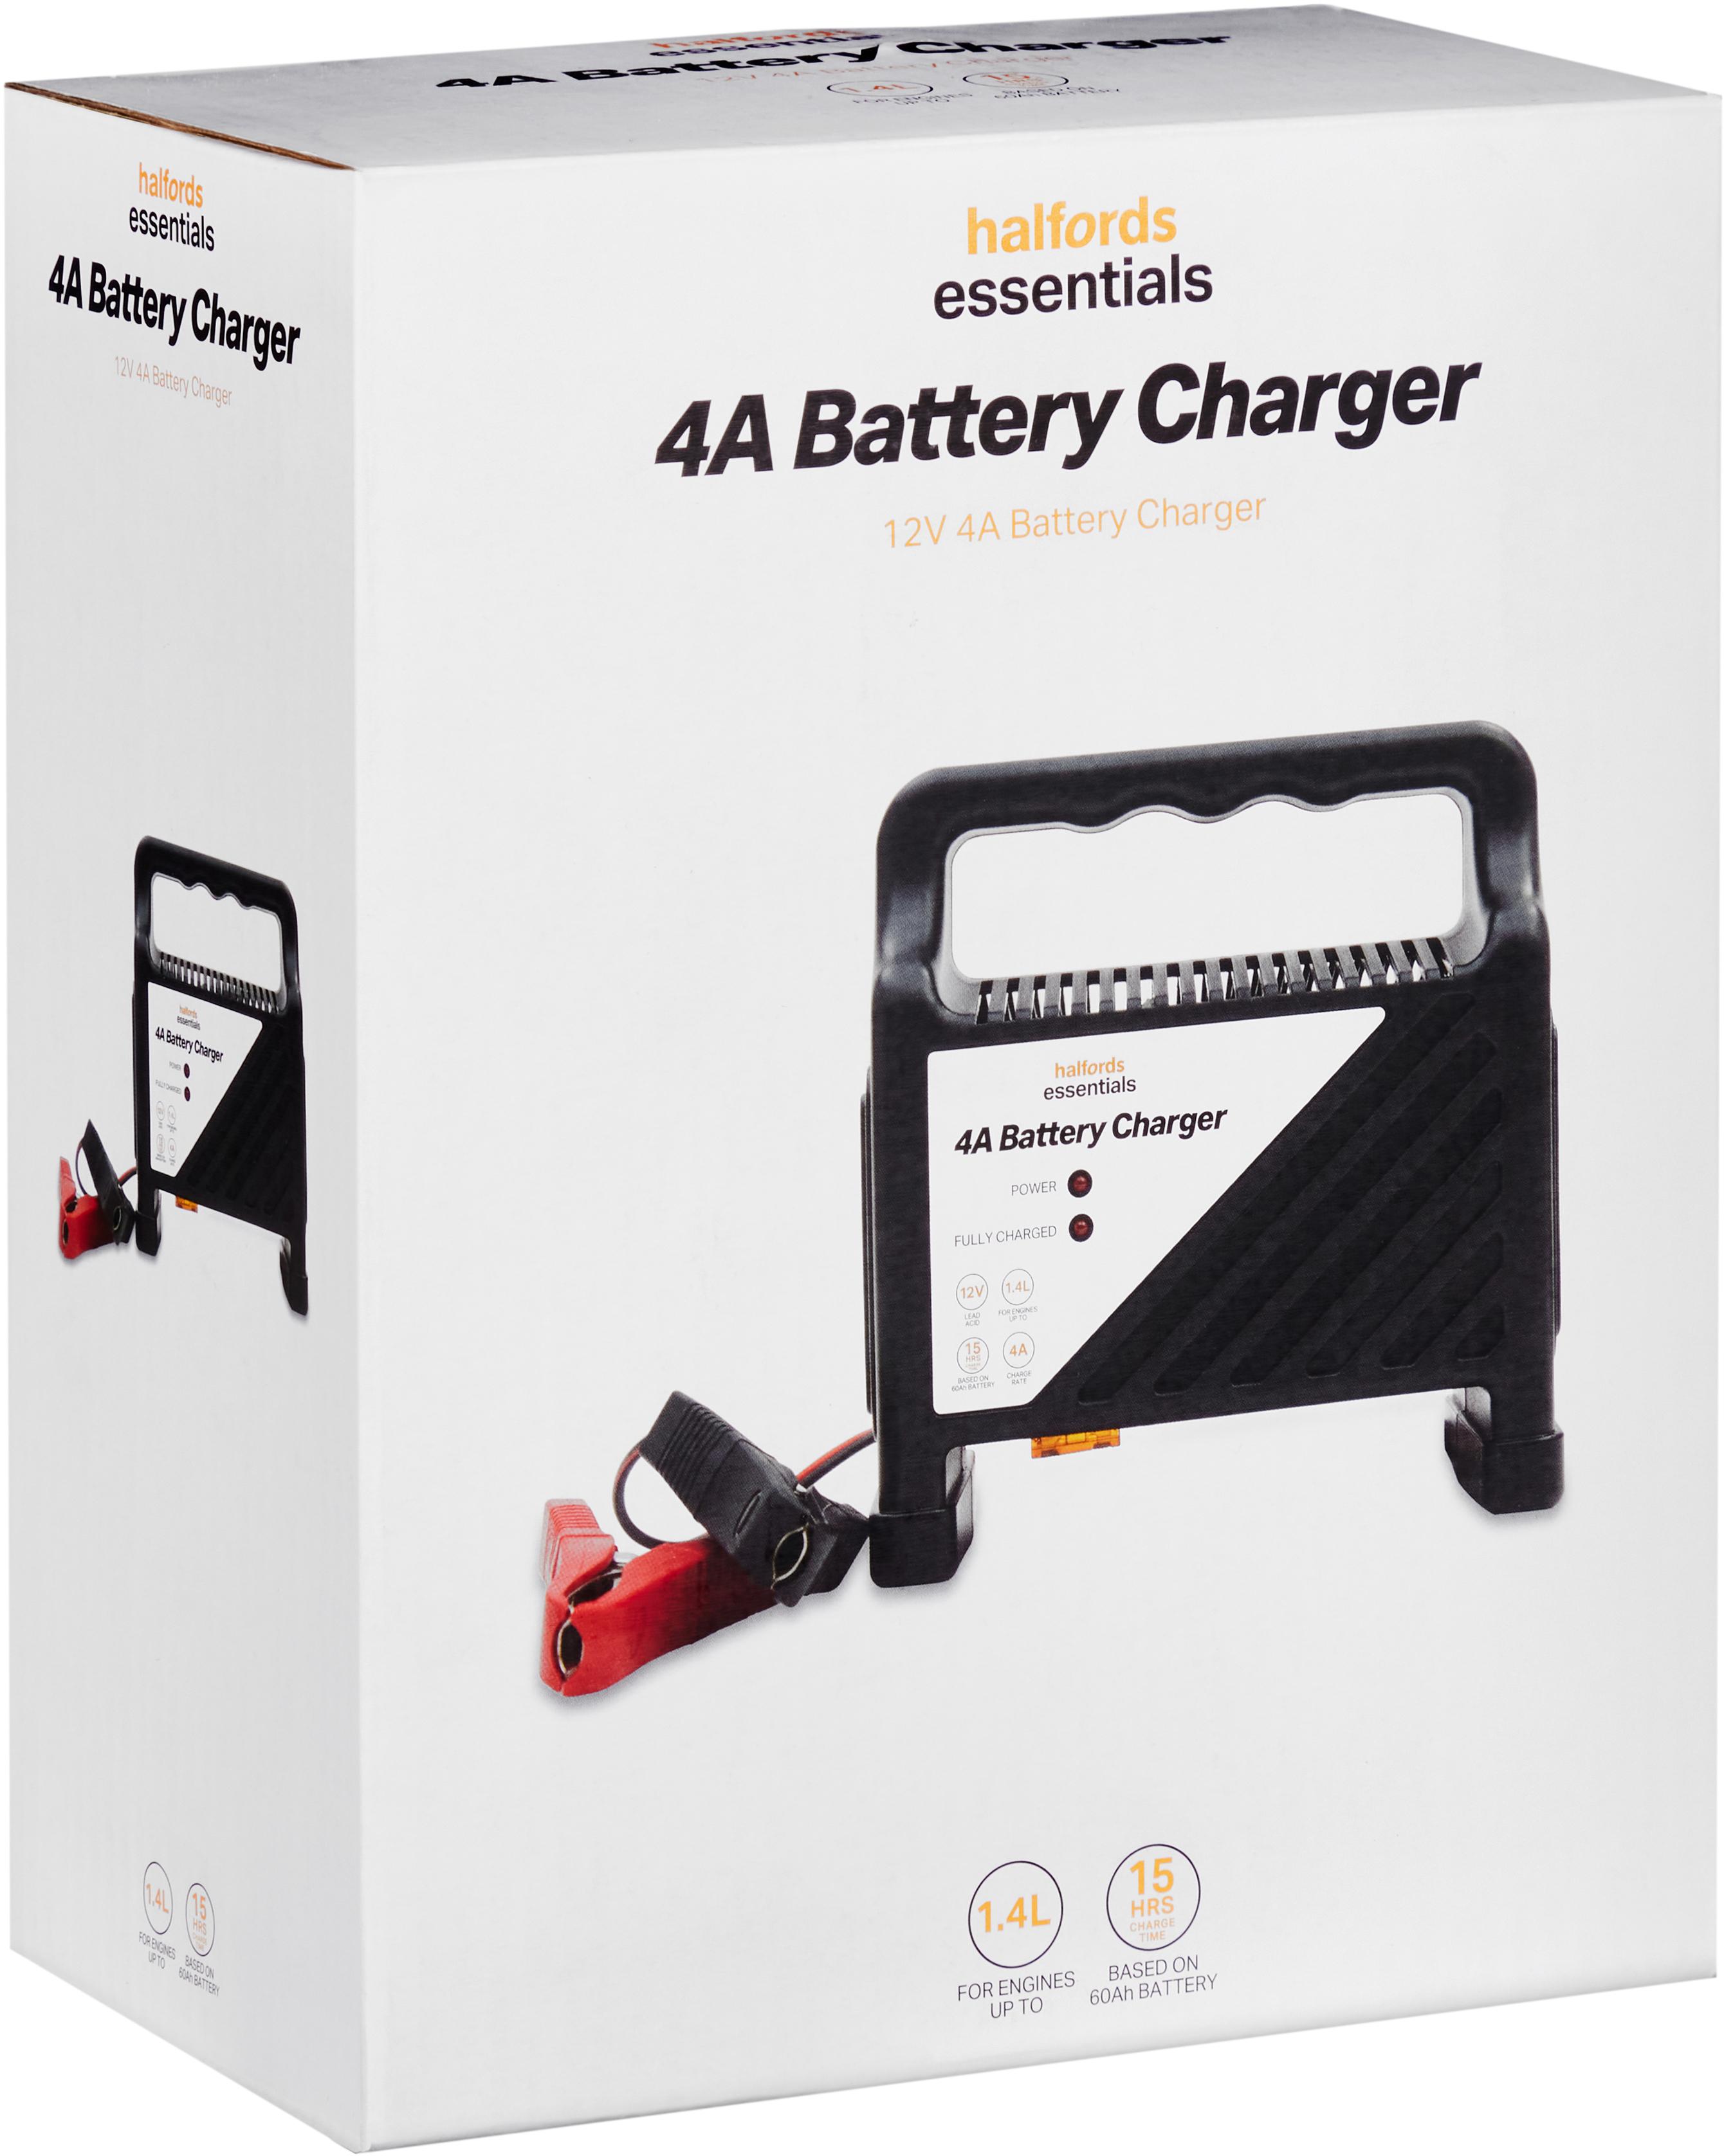 Halfords Essentials Battery Charger 4A